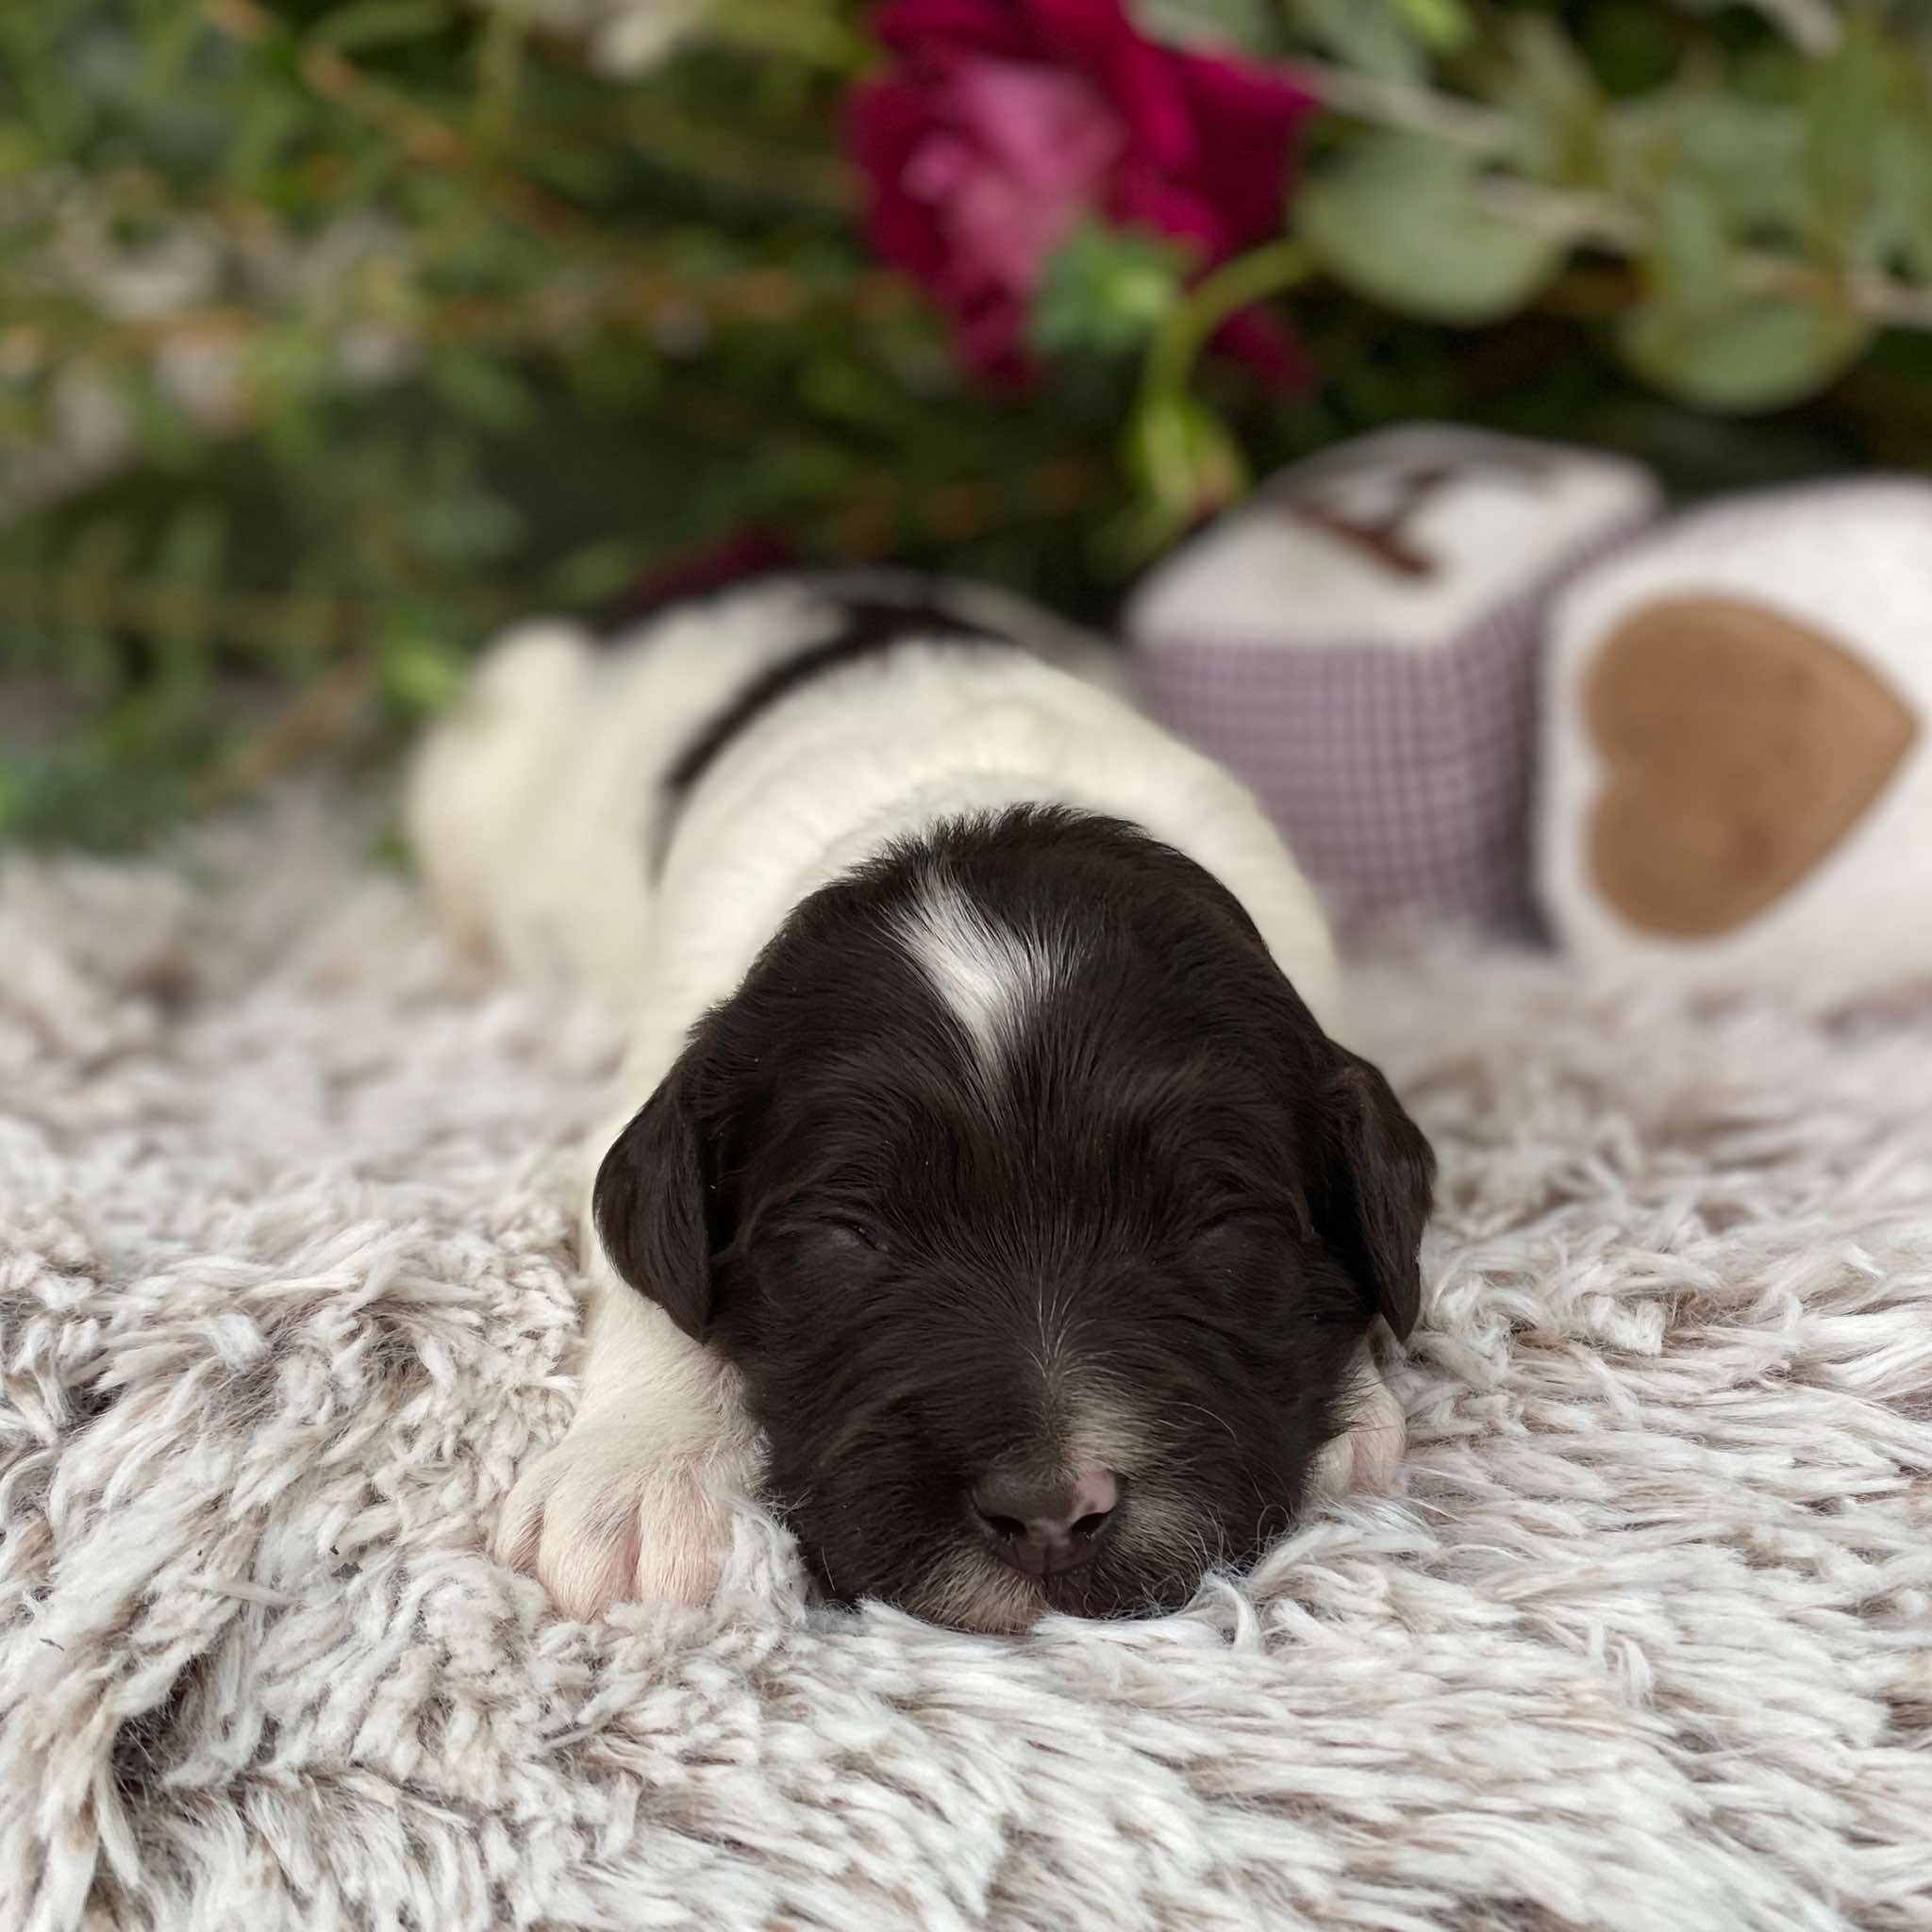 COLLAR COLOUR: Grey. PARENTS: Geisha and Pierrot. DOB: 14/4/2023. SIZE: Miniature to small-medium. COLOUR : Chocolate. MARKINGS: Parti. COAT: Fleece. WEIGHT: 1030 grams. AGE: Two weeks.